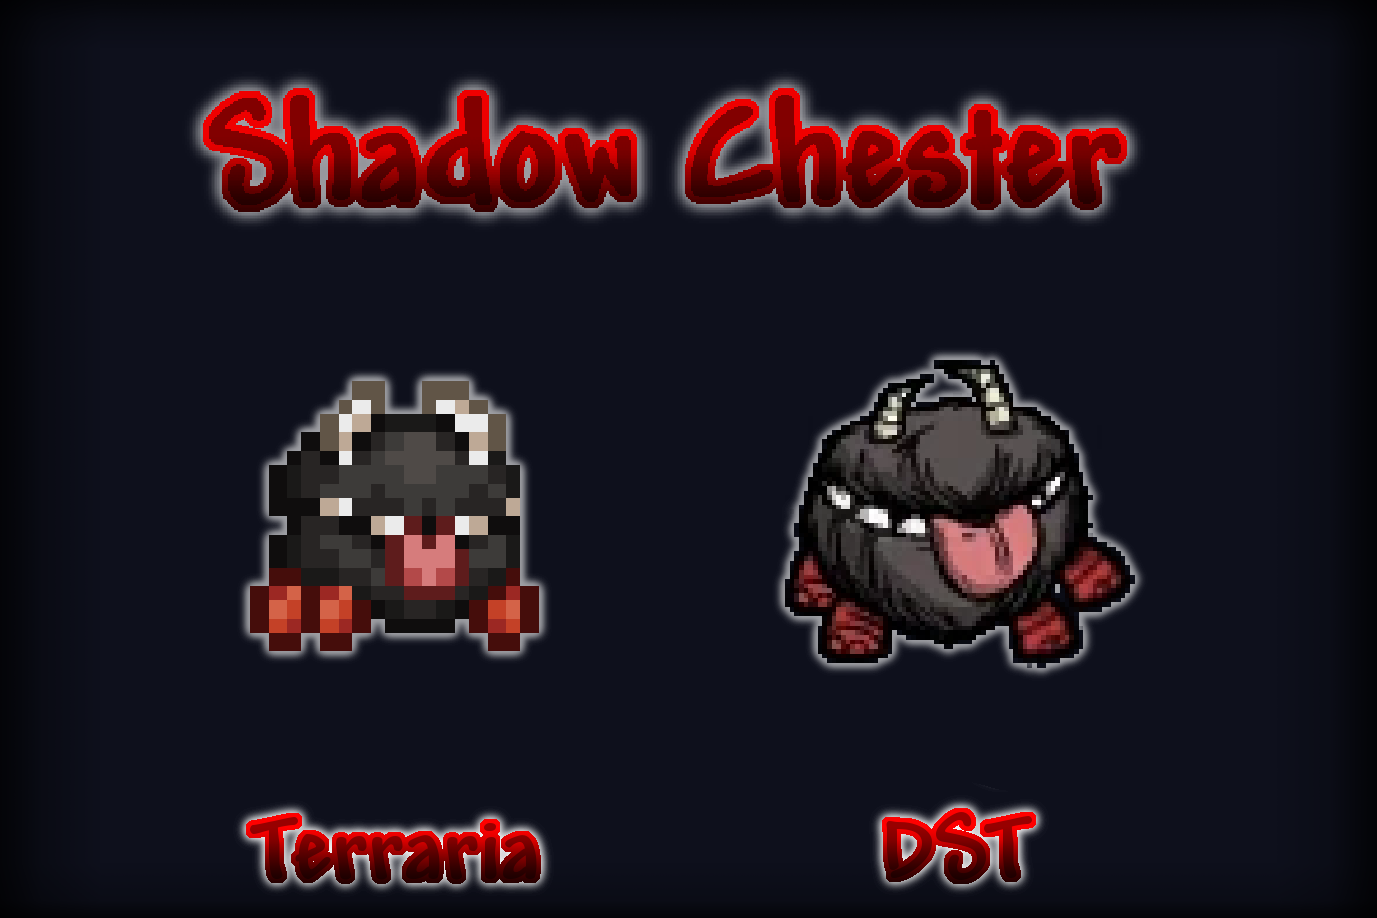 ShadowChester.png